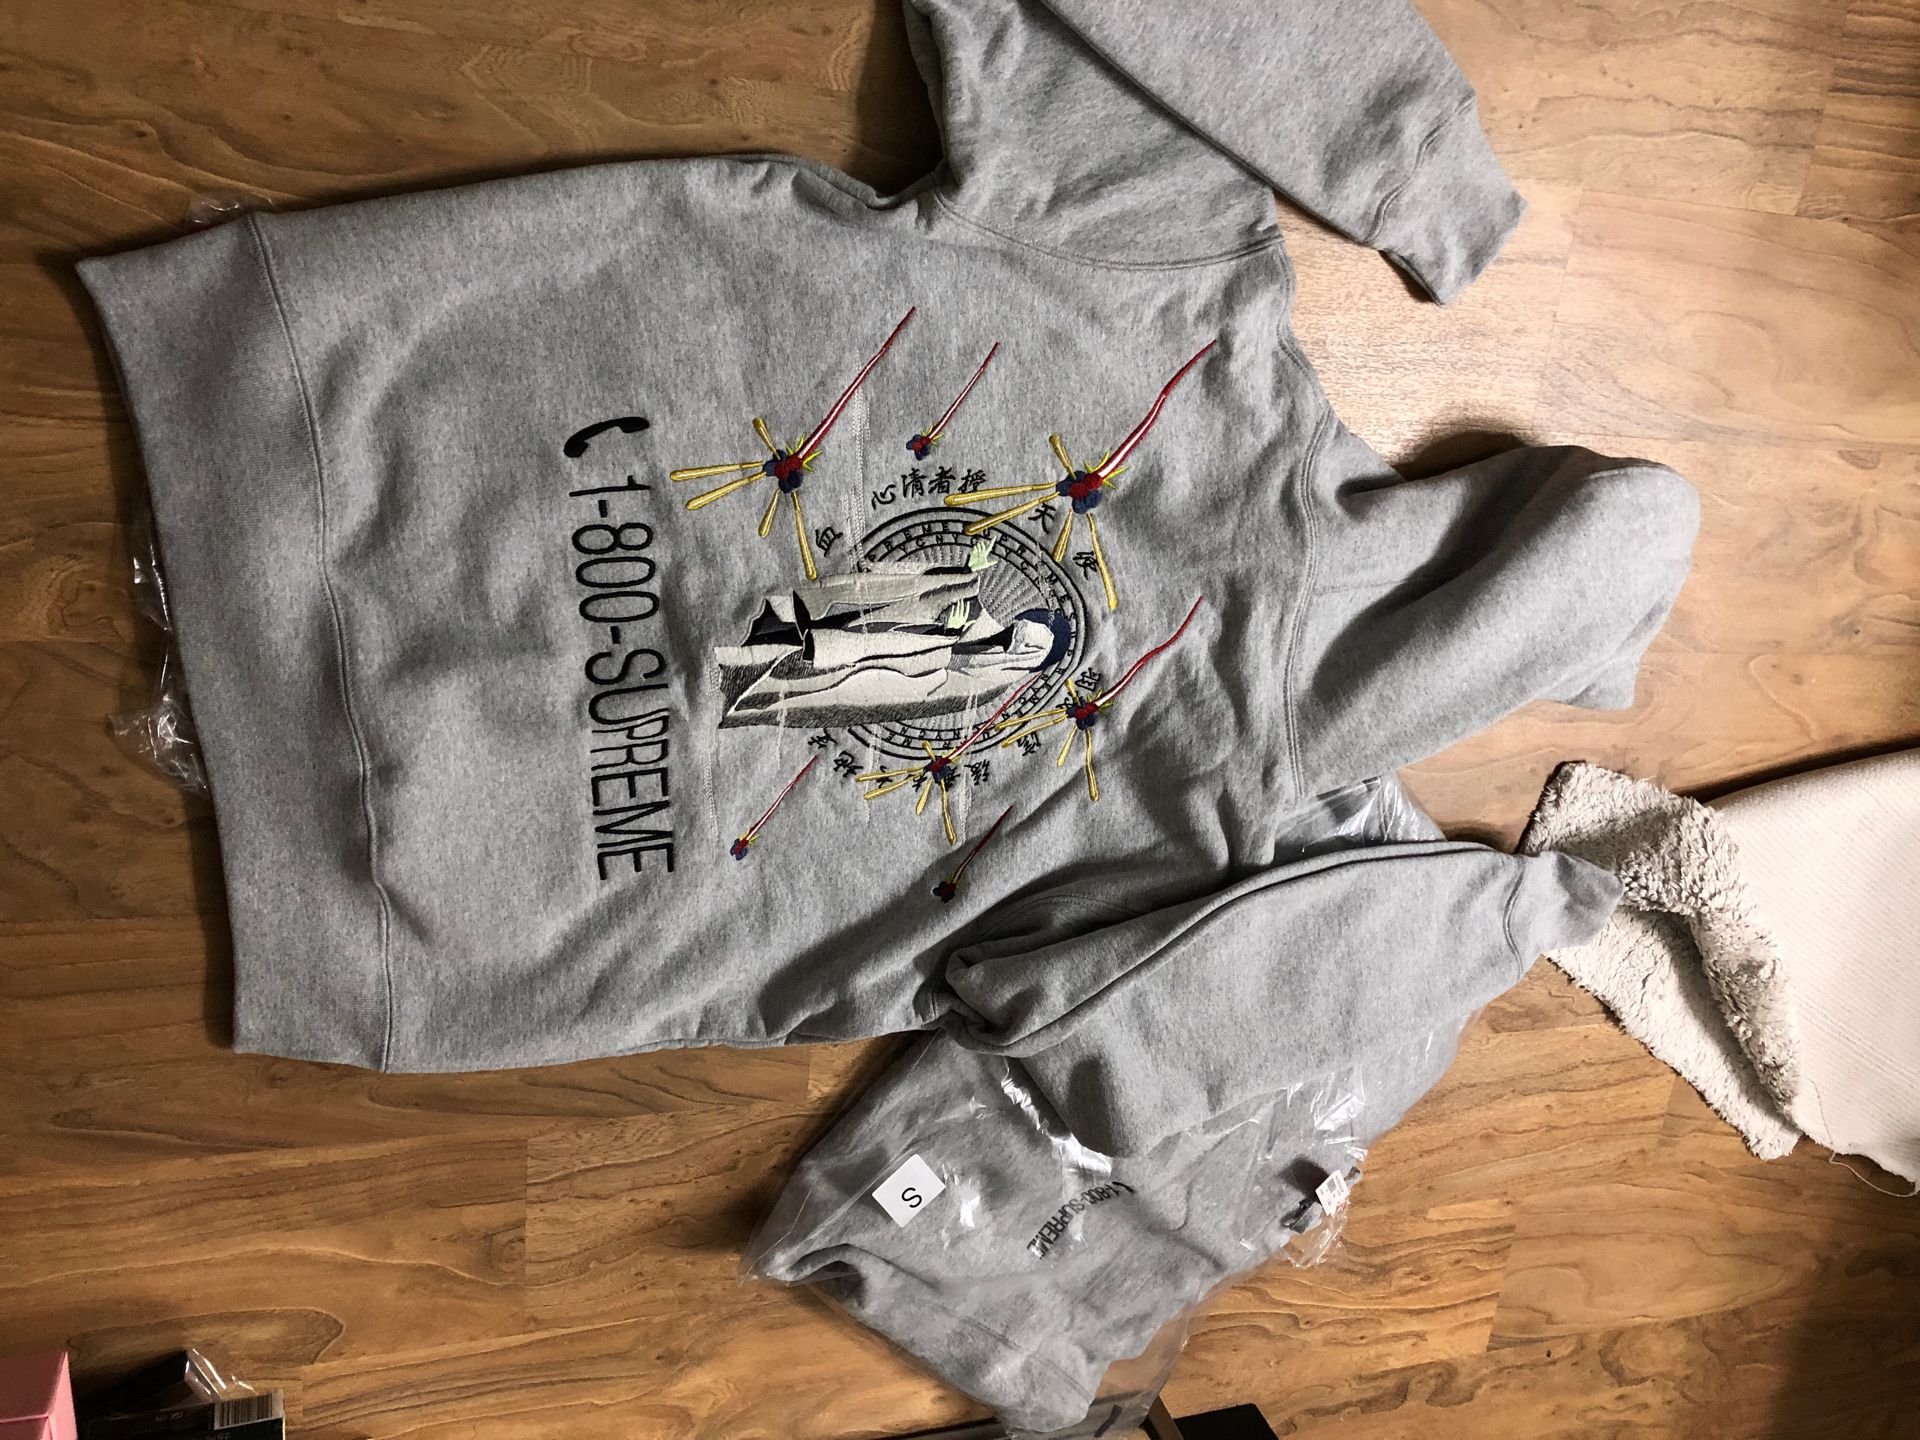 Brand new supreme hoody size small (I have 2)